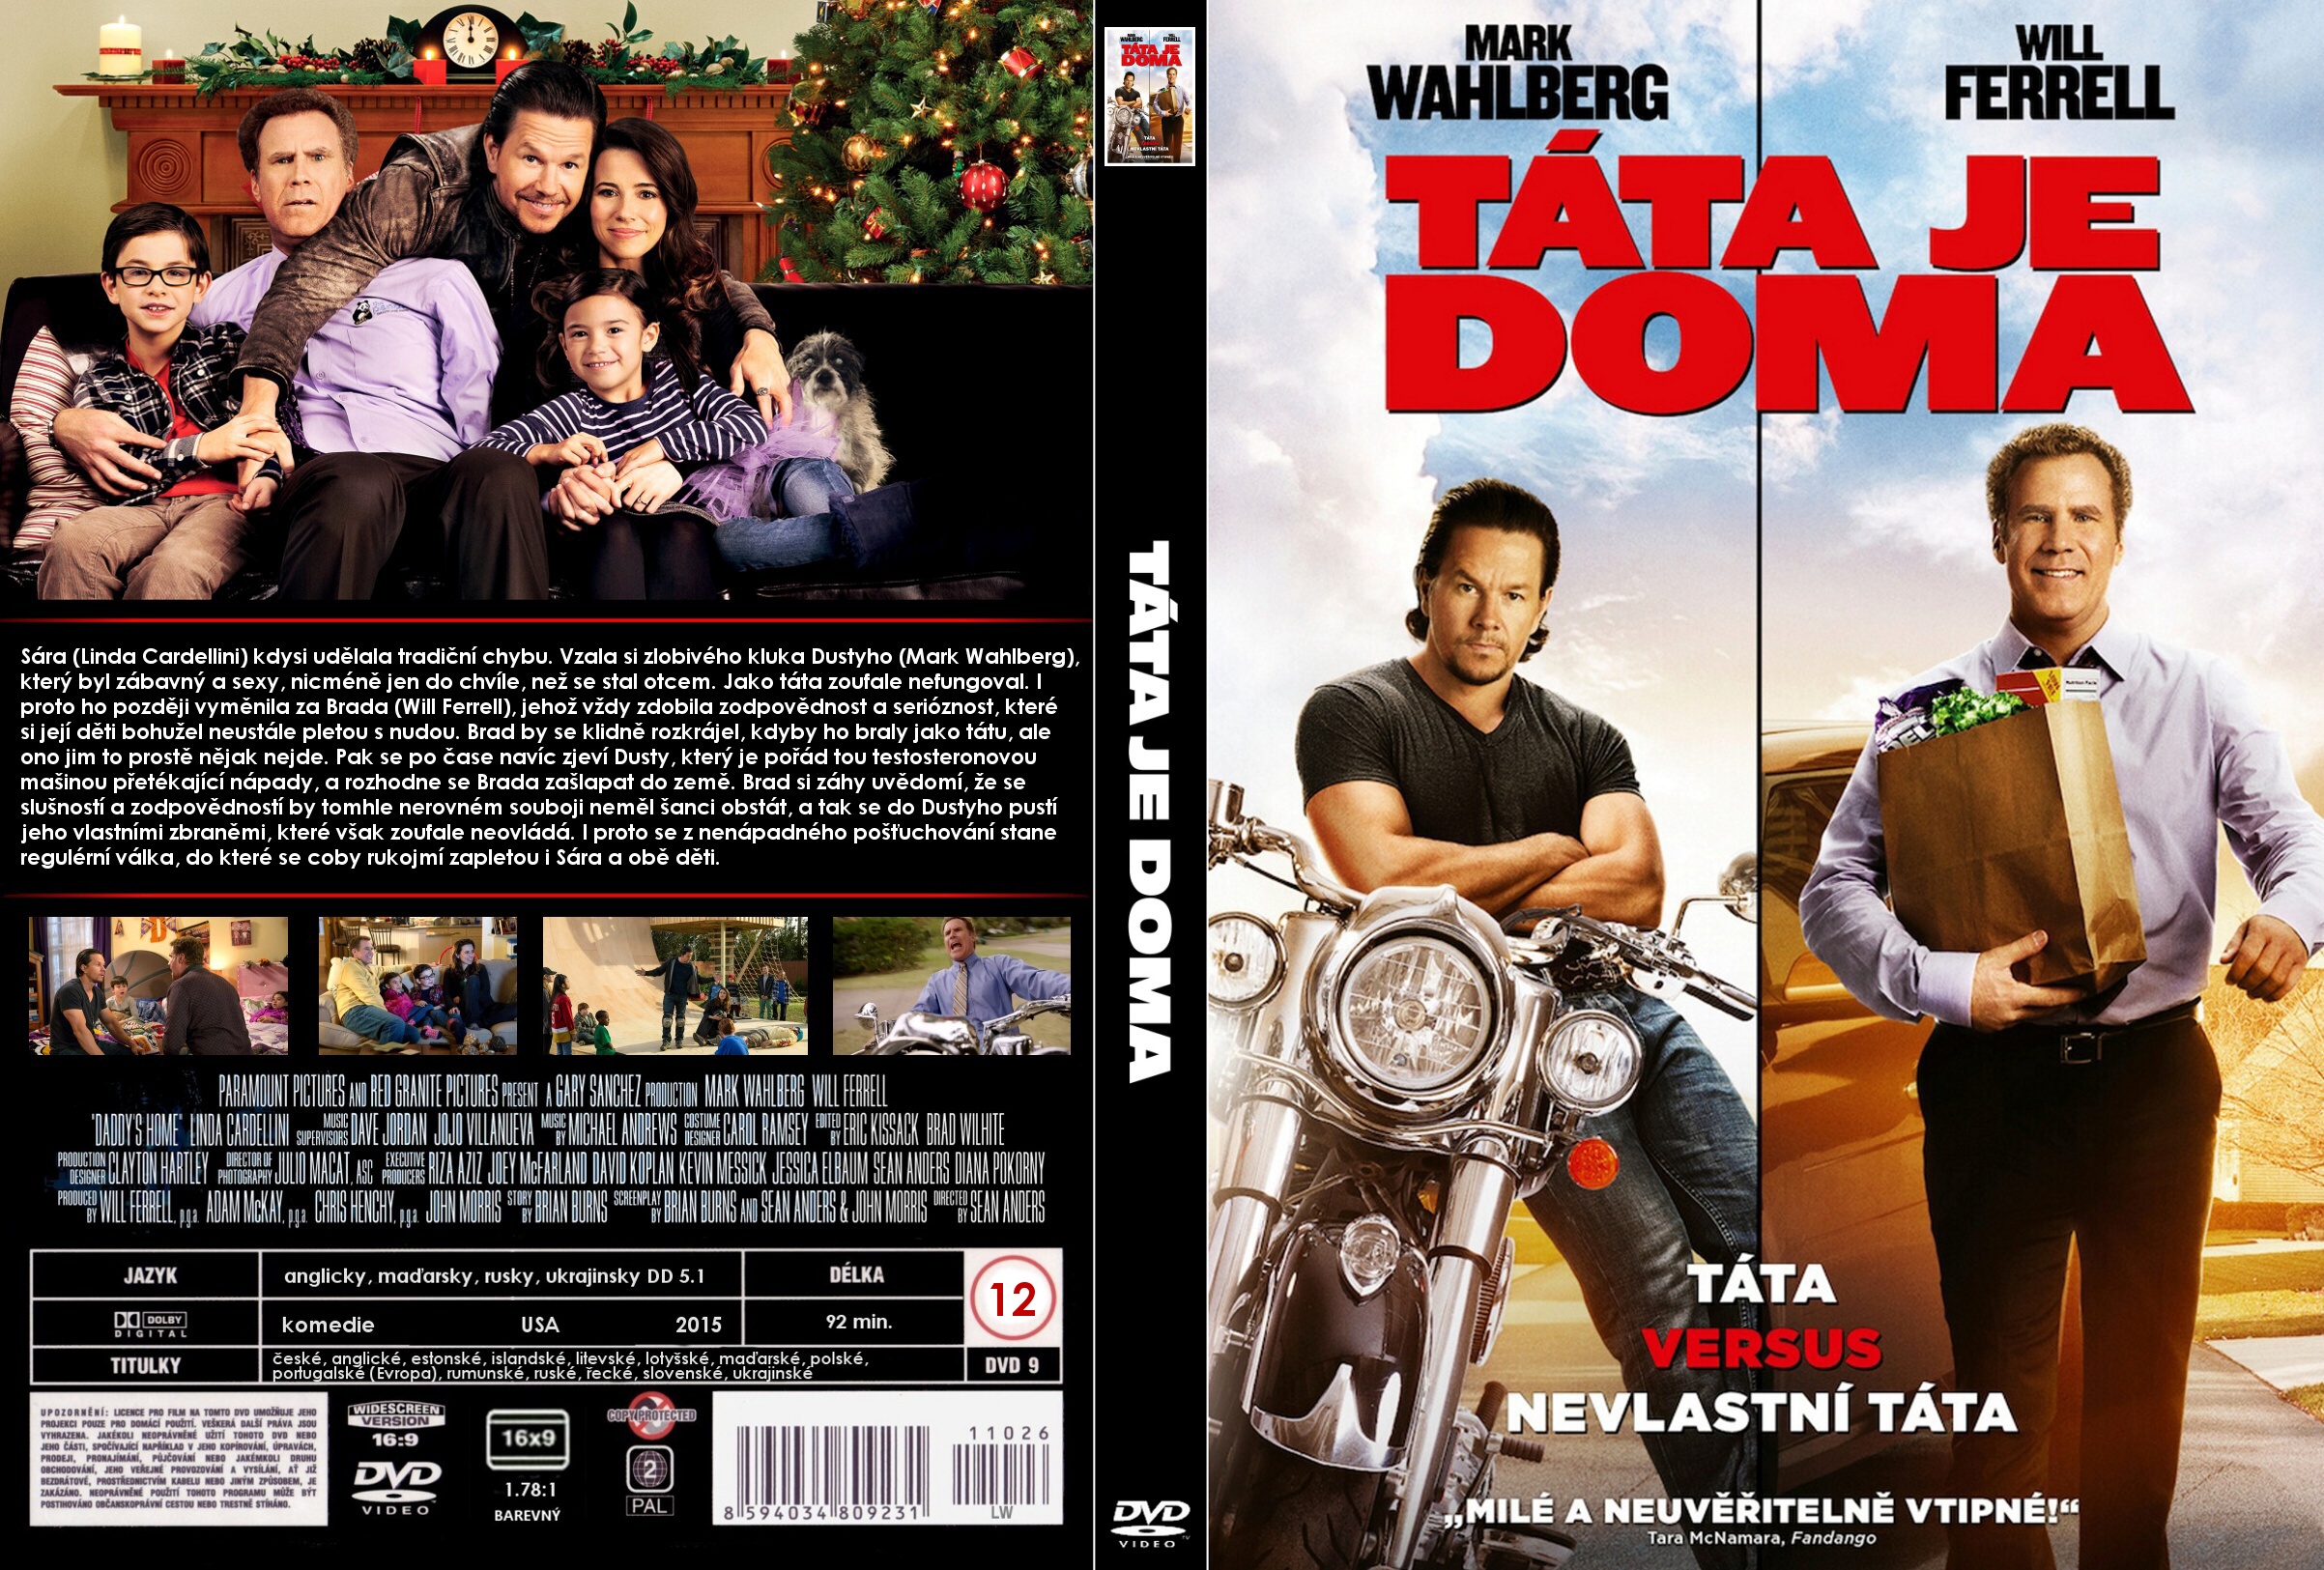 download film daddys home 2015